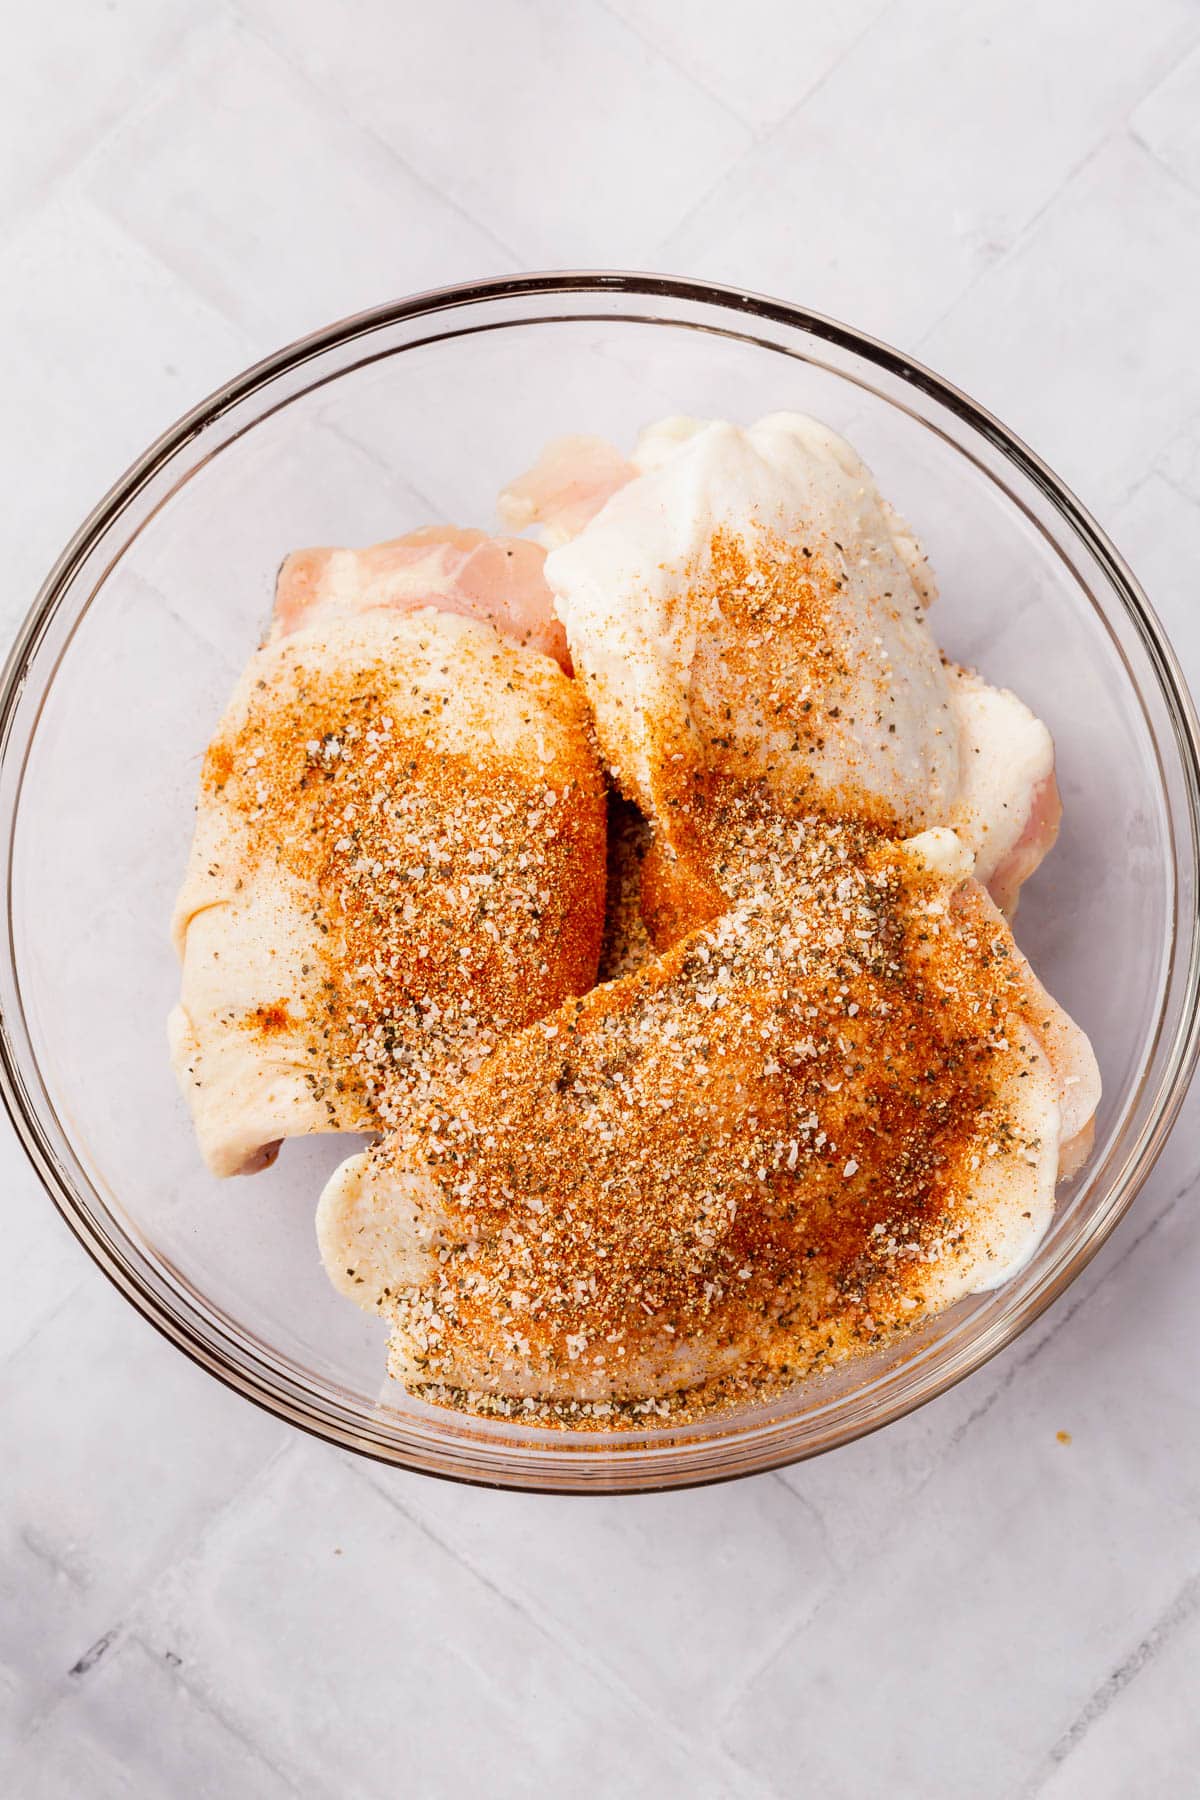 Raw chicken thighs topped with a seasoning blend before mixing together in a glass mixing bowl.